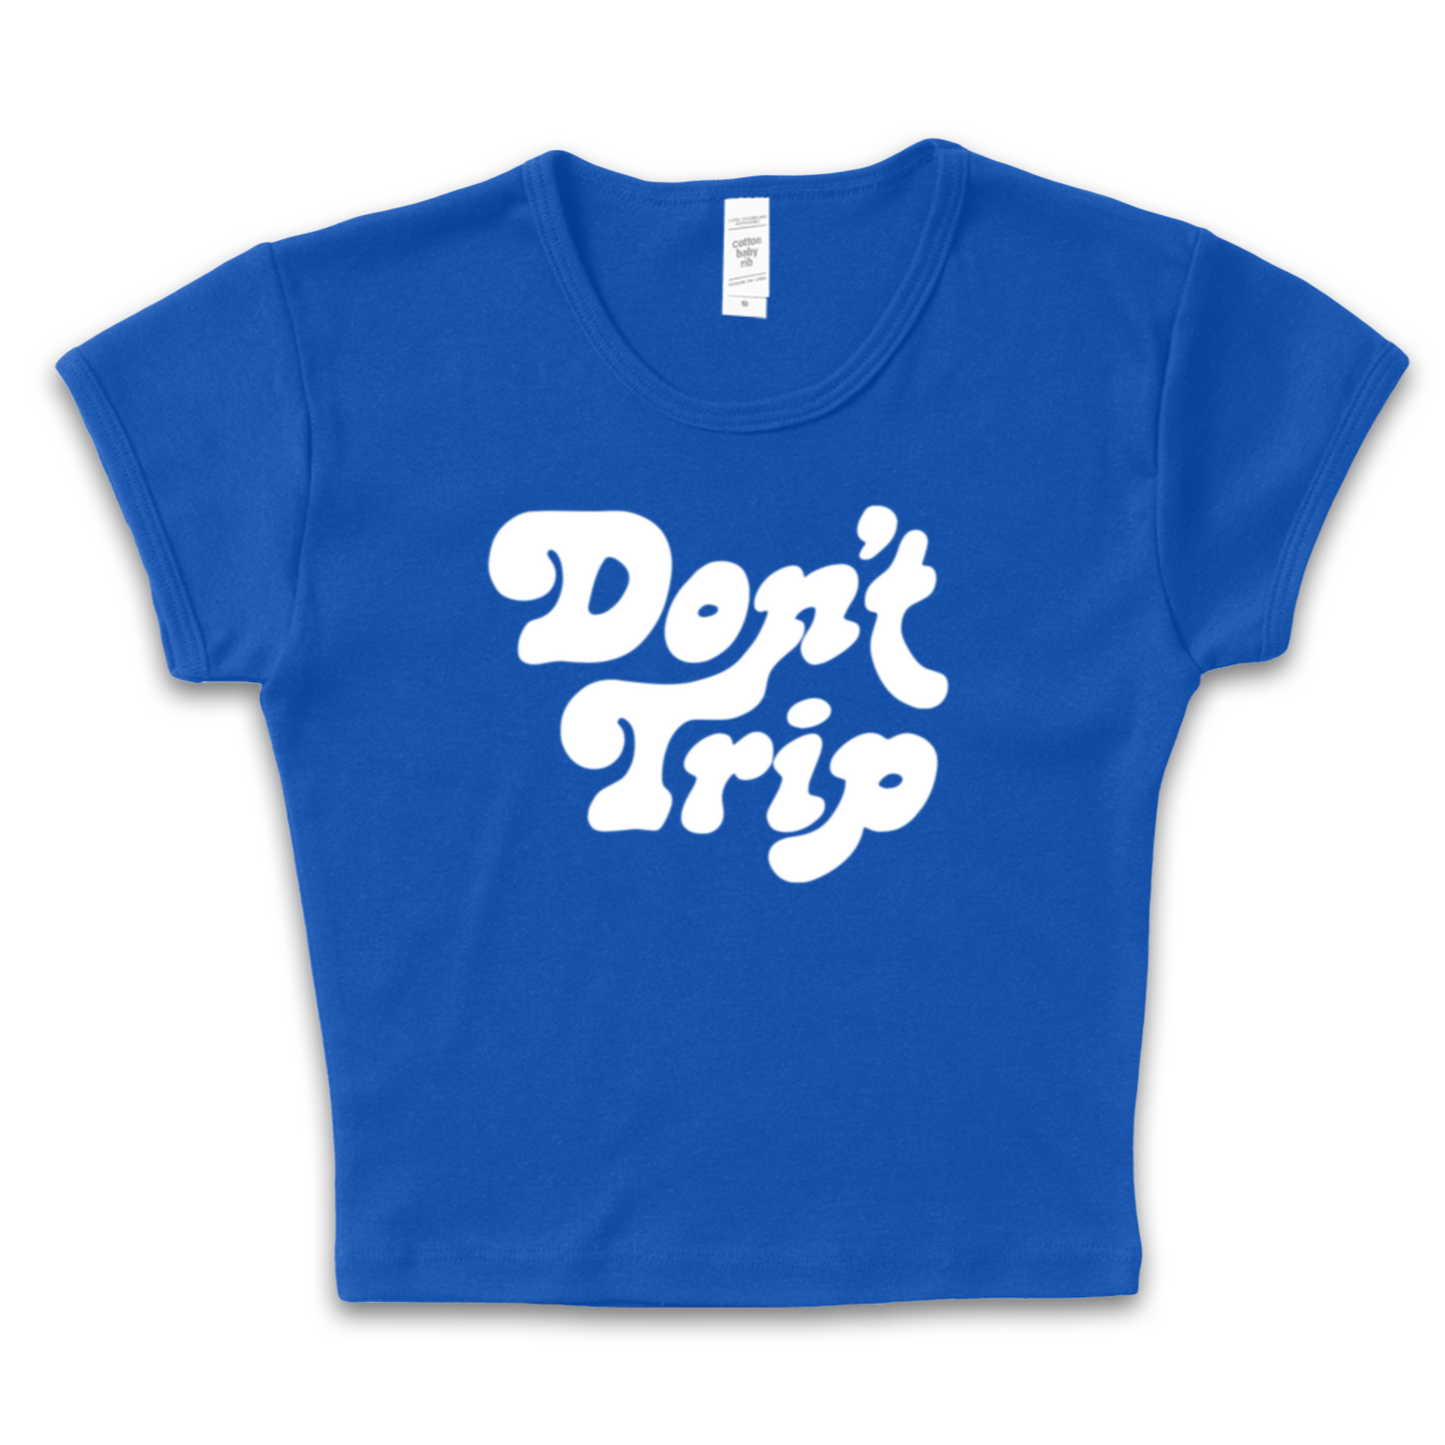 Don't Trip Baby Tee